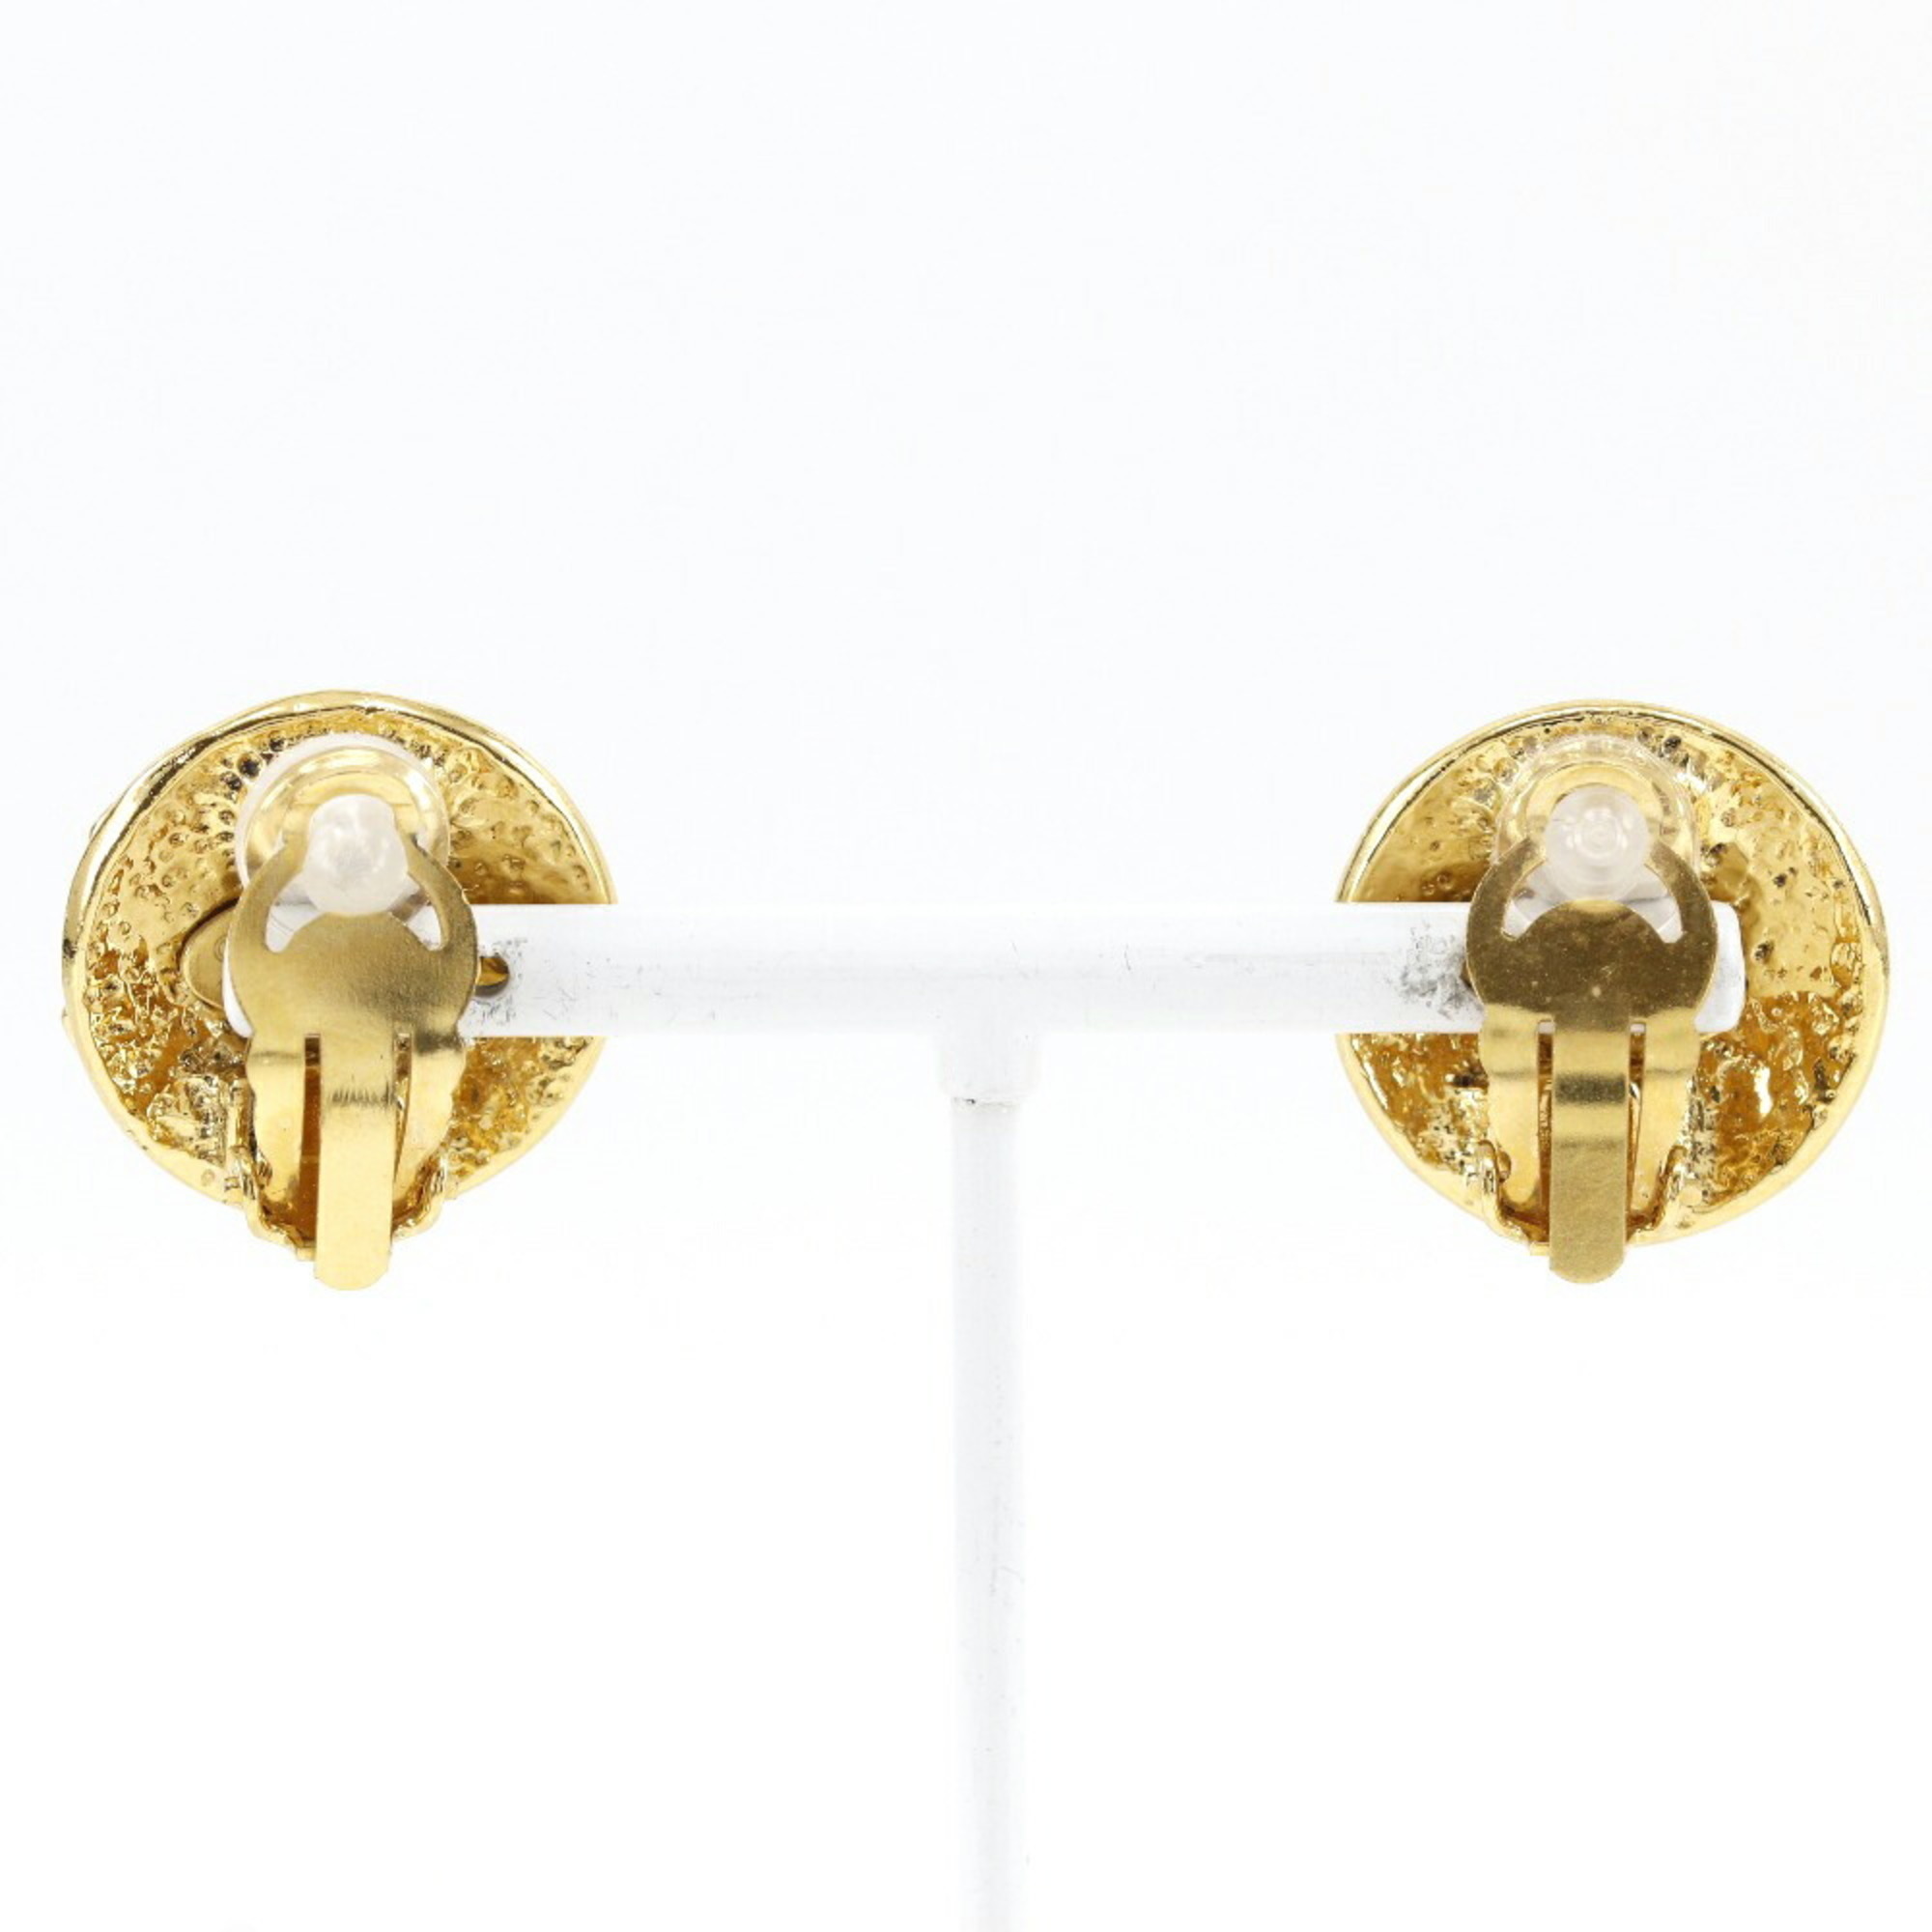 CHANEL Earrings, Gold Plated, 1994, 94P, Approx. 18.8g, Women's, I131824101